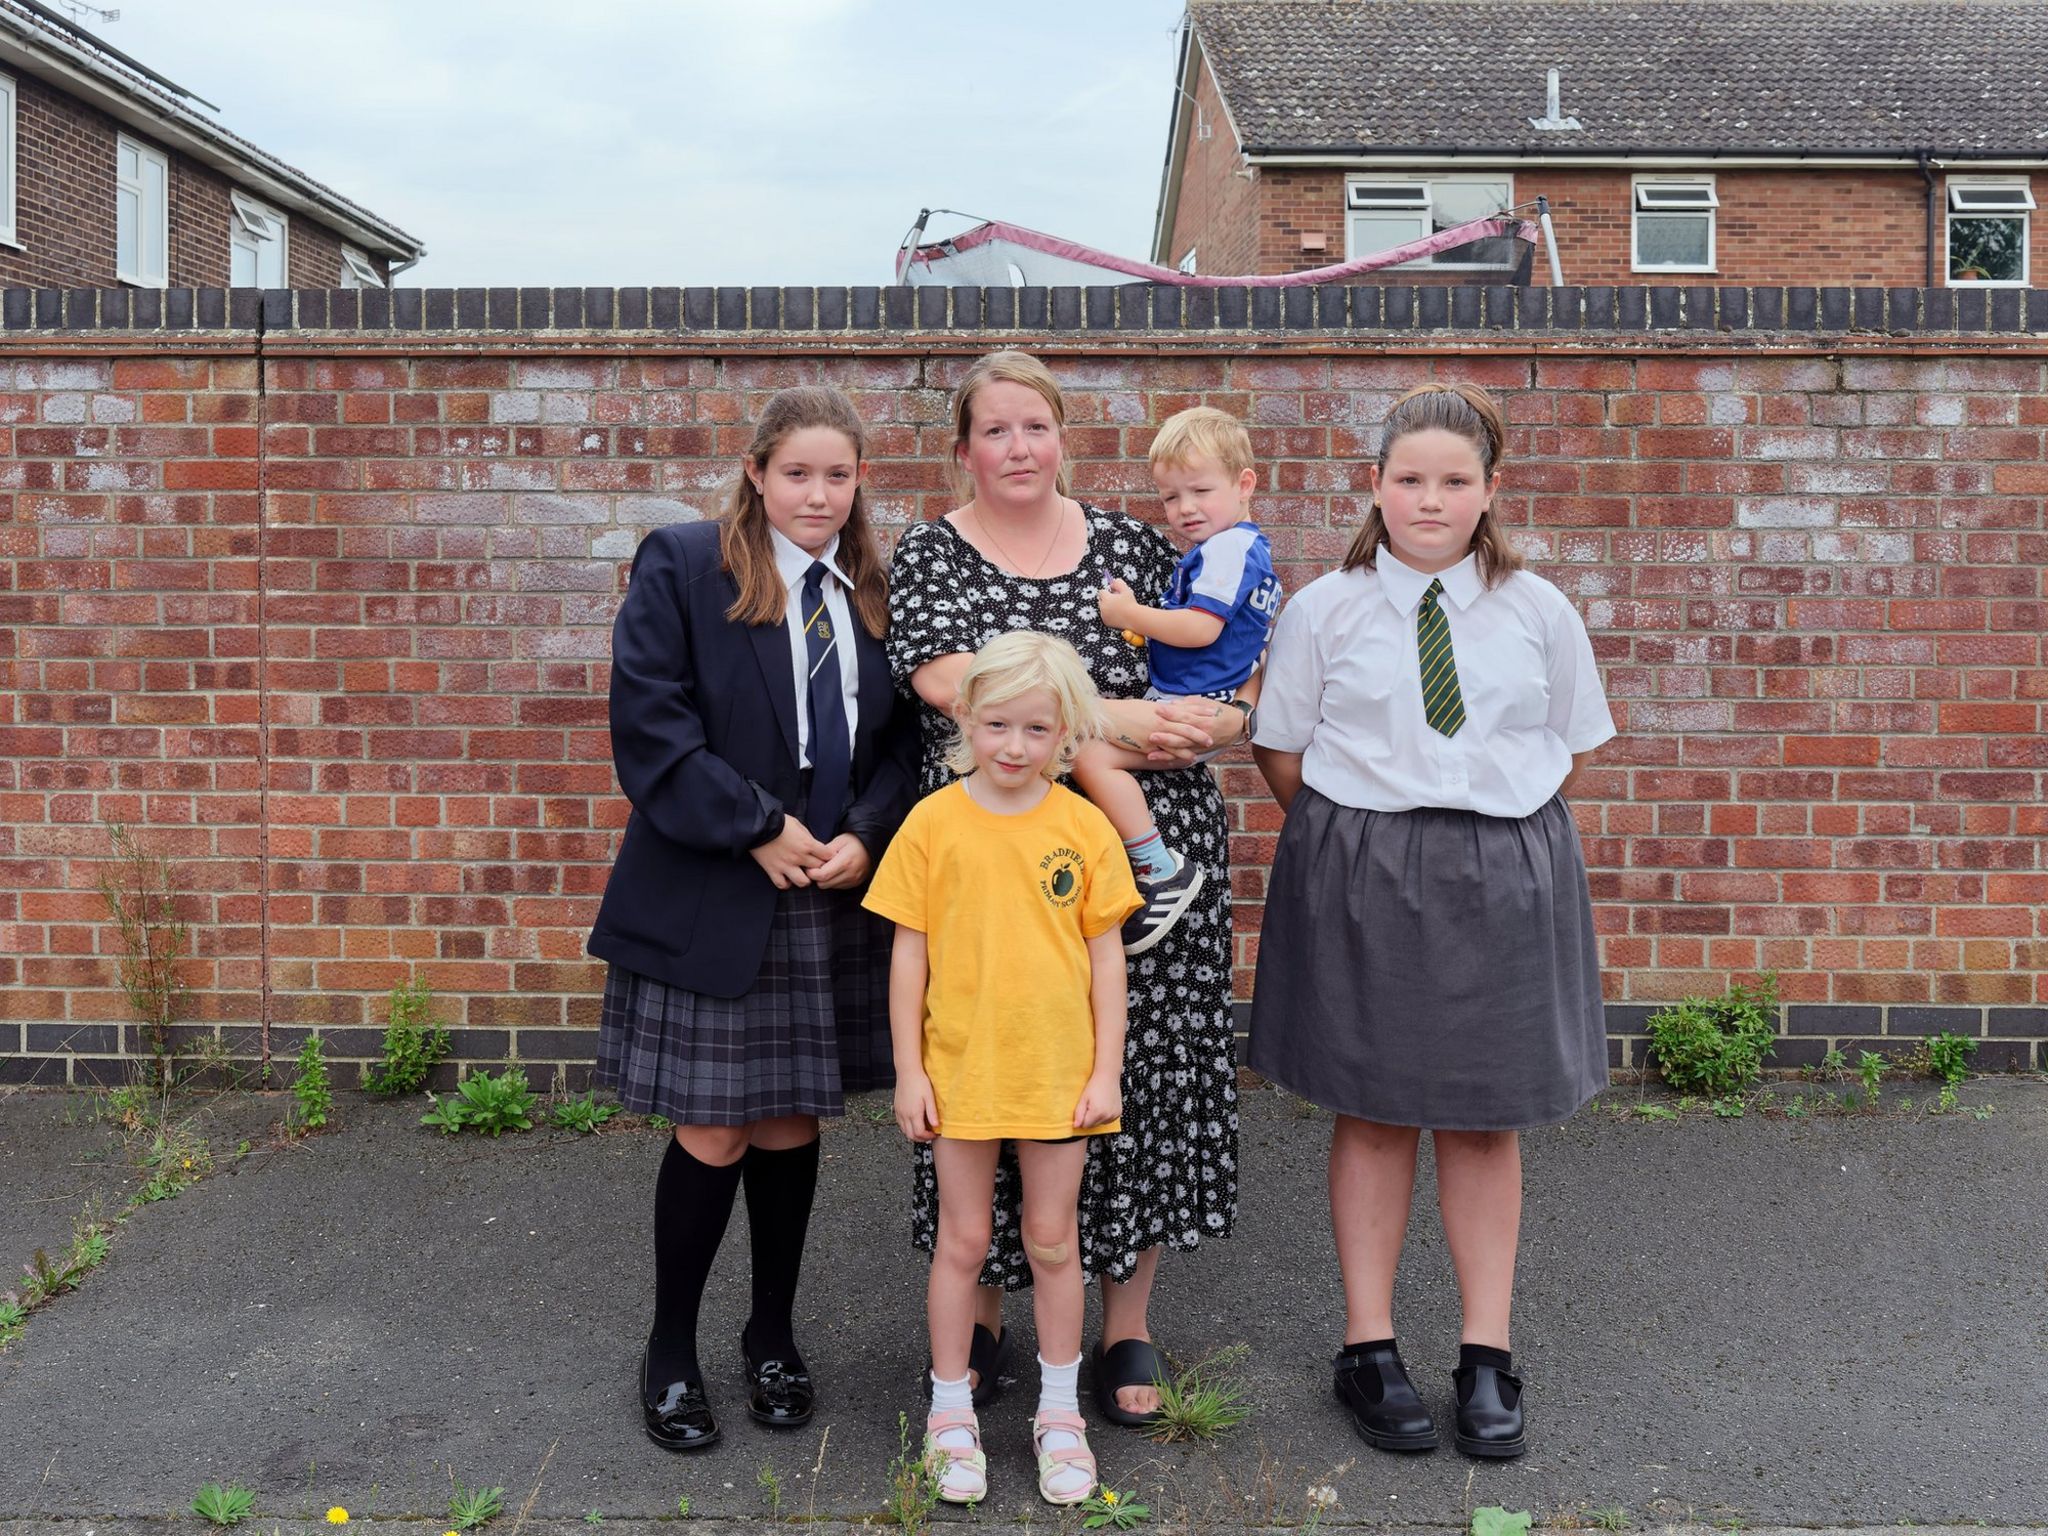 Jodie, pictured with all her four children, shown in front of a red brick wall with modern council-built terraced housing in the background